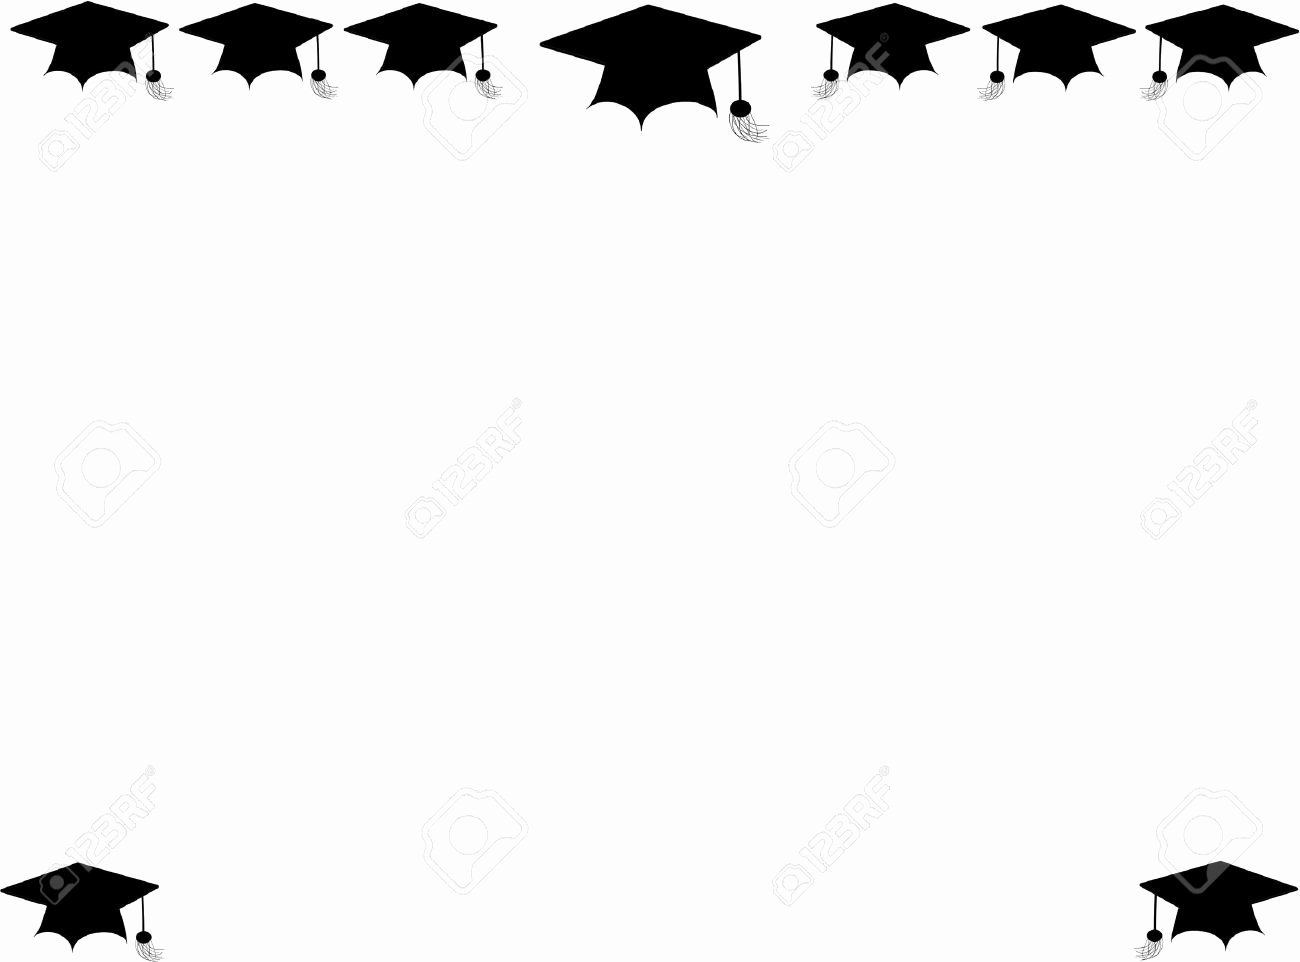 Graduation Borders and Backgrounds Best Of Best Graduation Border Clipartion